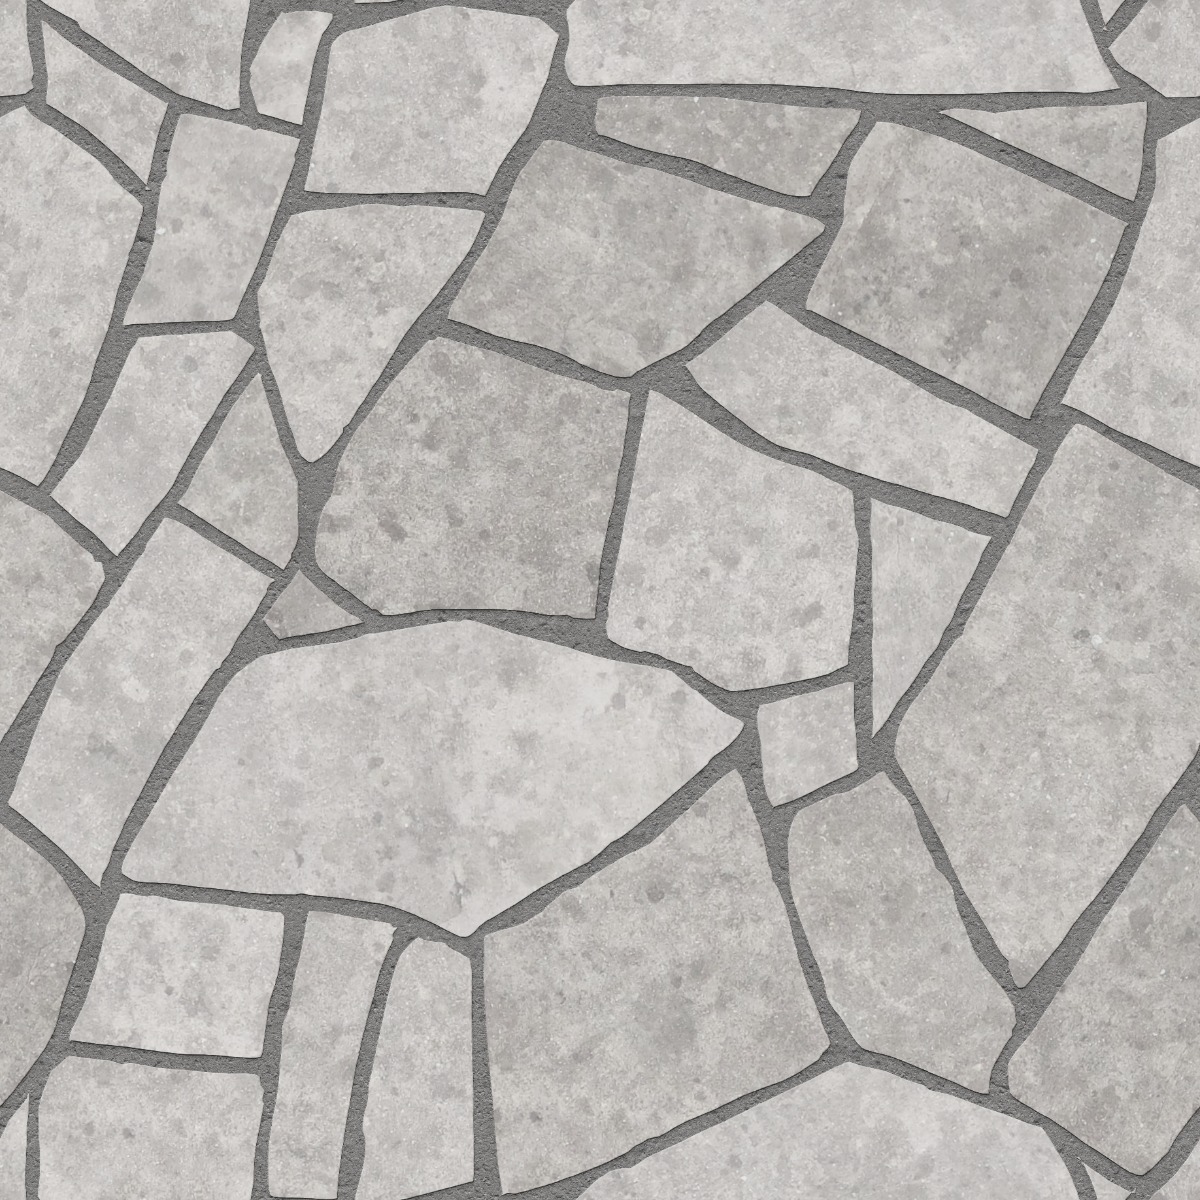 A seamless concrete texture with concrete blocks arranged in a Crazy Paving pattern